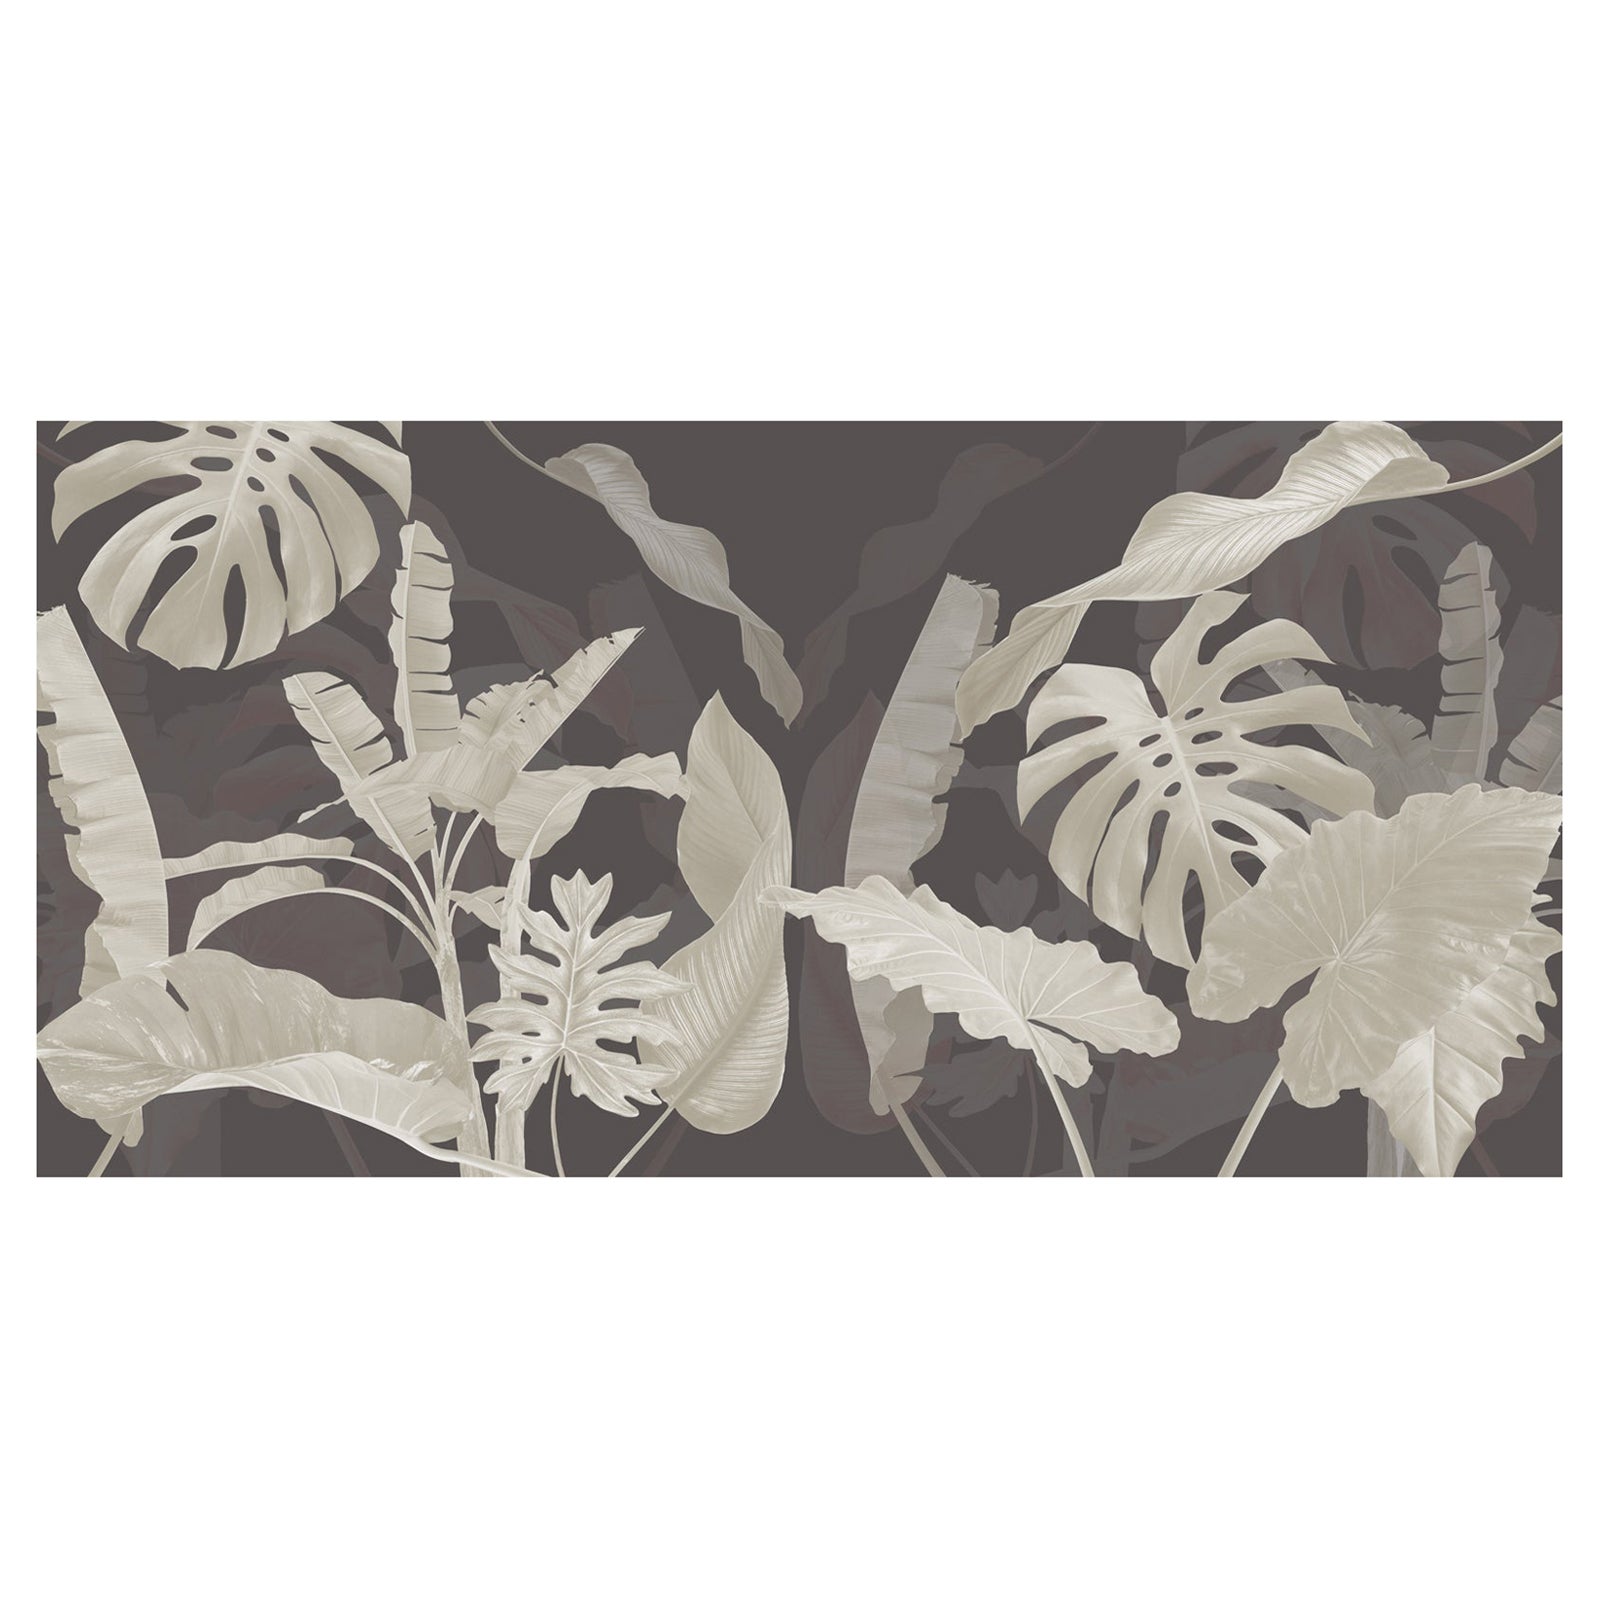 EDGE Collections JungleScape Twilight; a whimsical nod to endless Summers For Sale